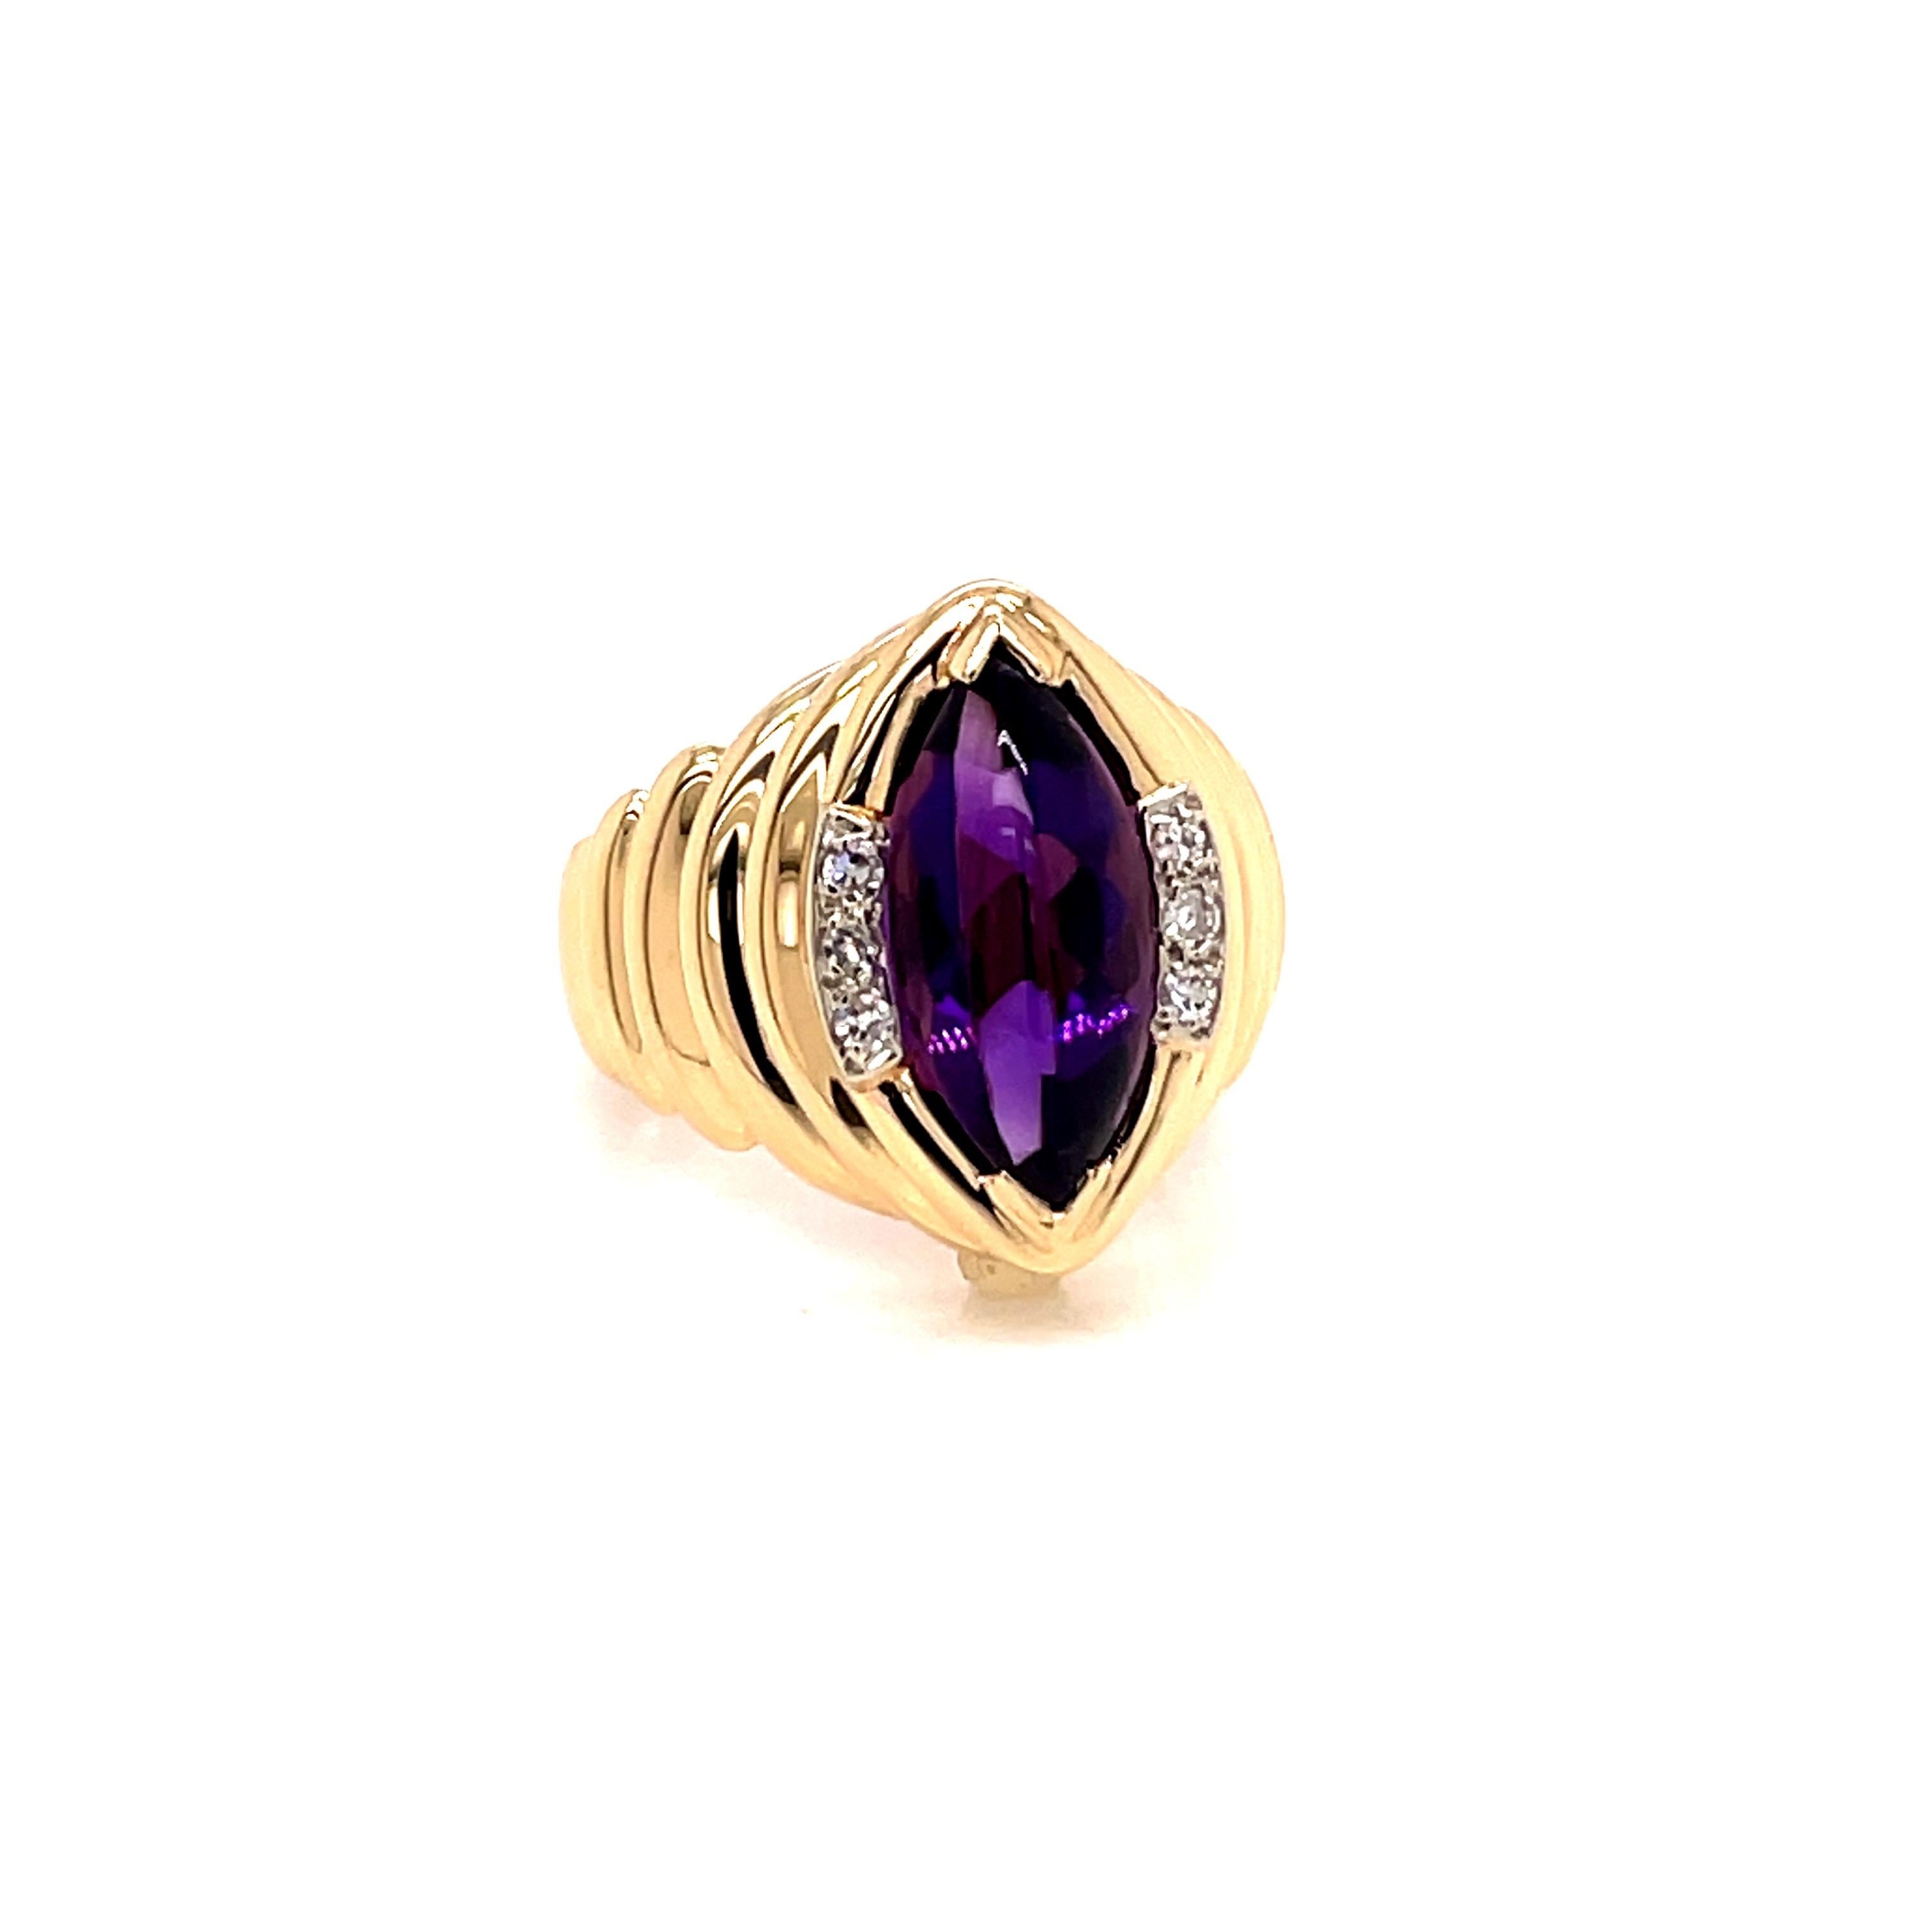 Vintage 1980's 3.50ct Marquise Cabochon Amethyst Ring with Diamonds - the amethyst weighs approximately 3.50ct and measures 14 x 7.2mm.  It is accented with 6 single cut diamonds weighing approximately .10ct G - H color and SI clarity.  The setting